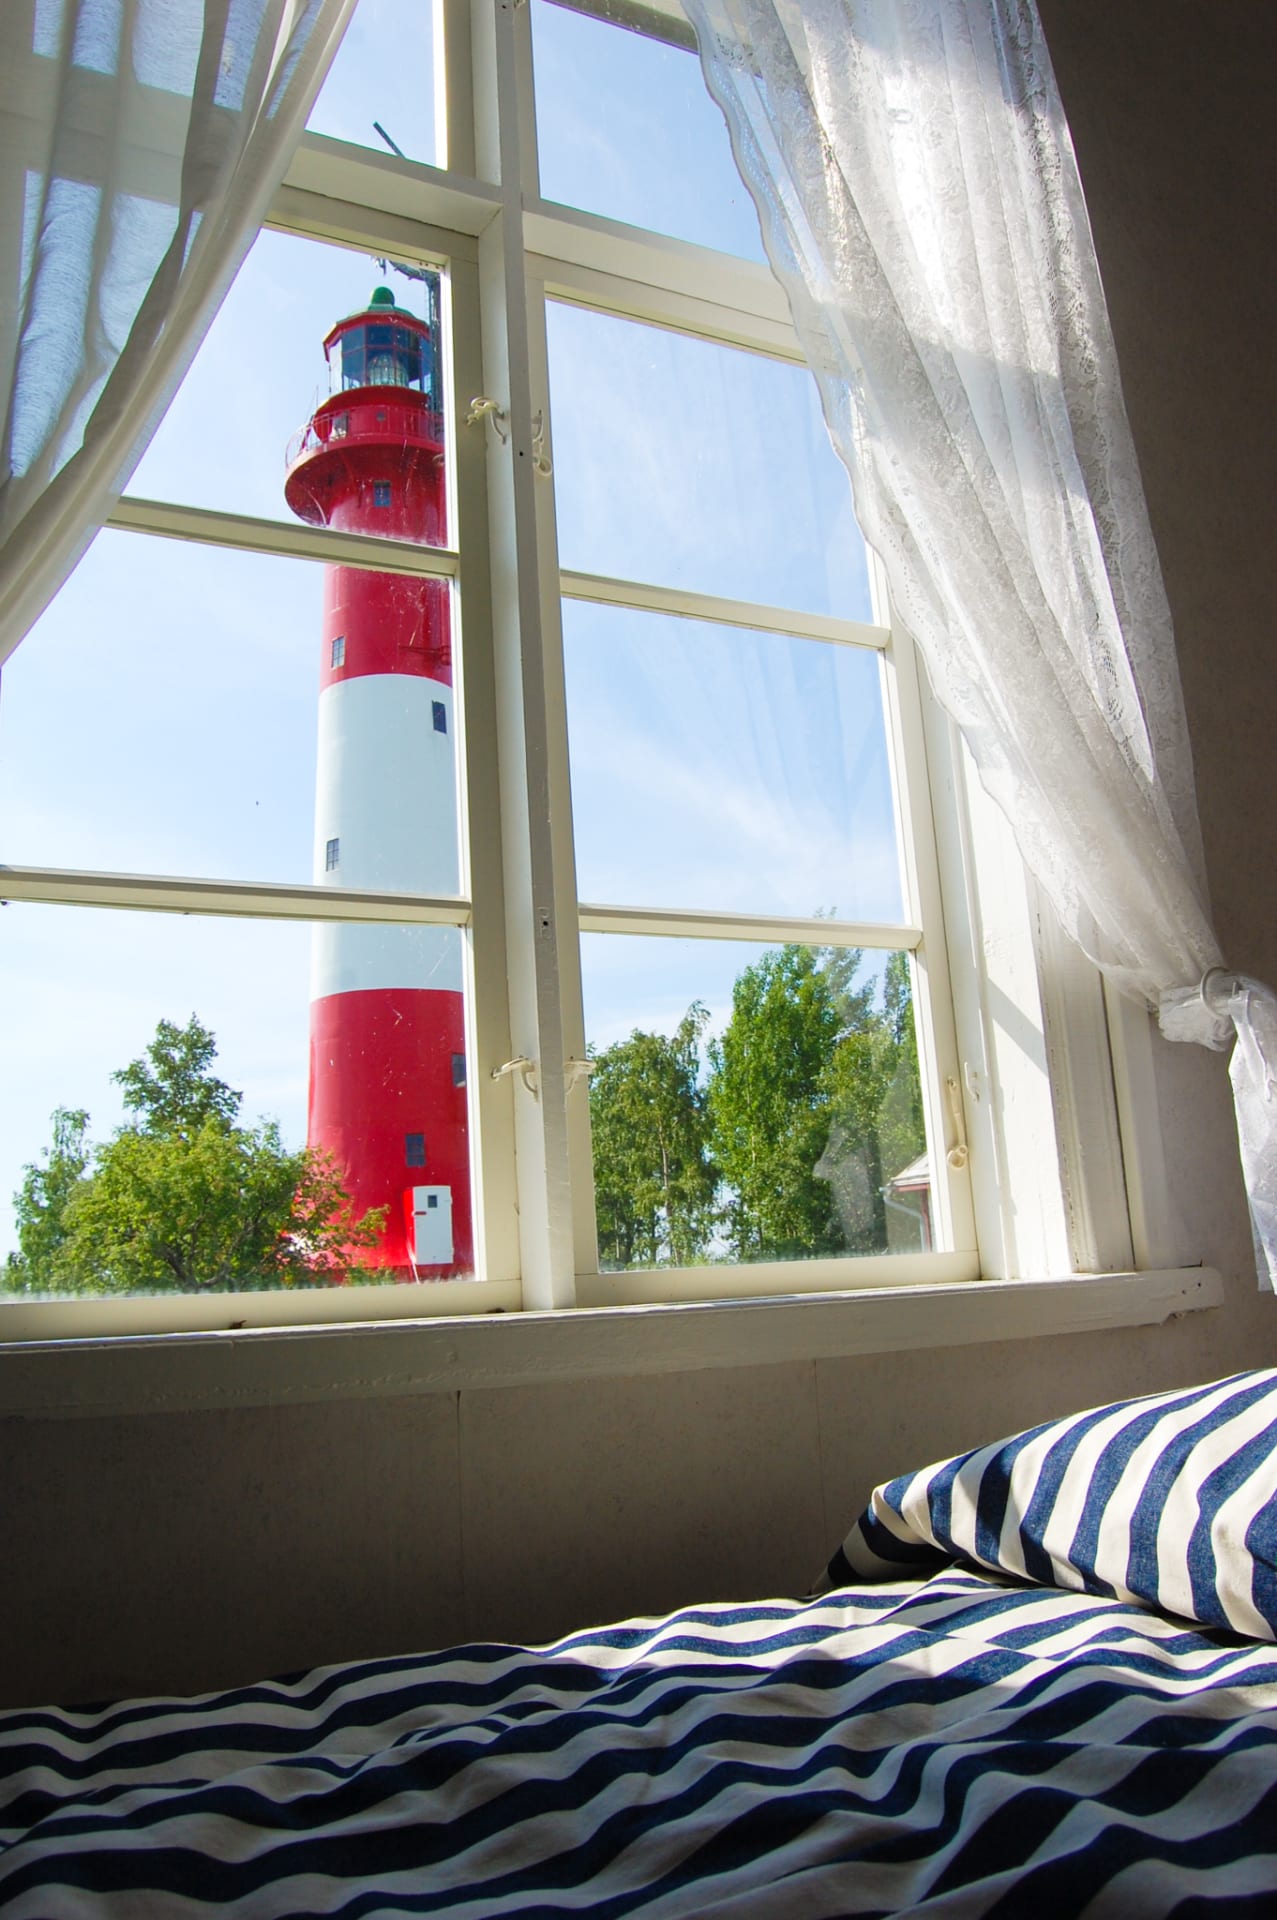 The view through the window to the lighthouse 